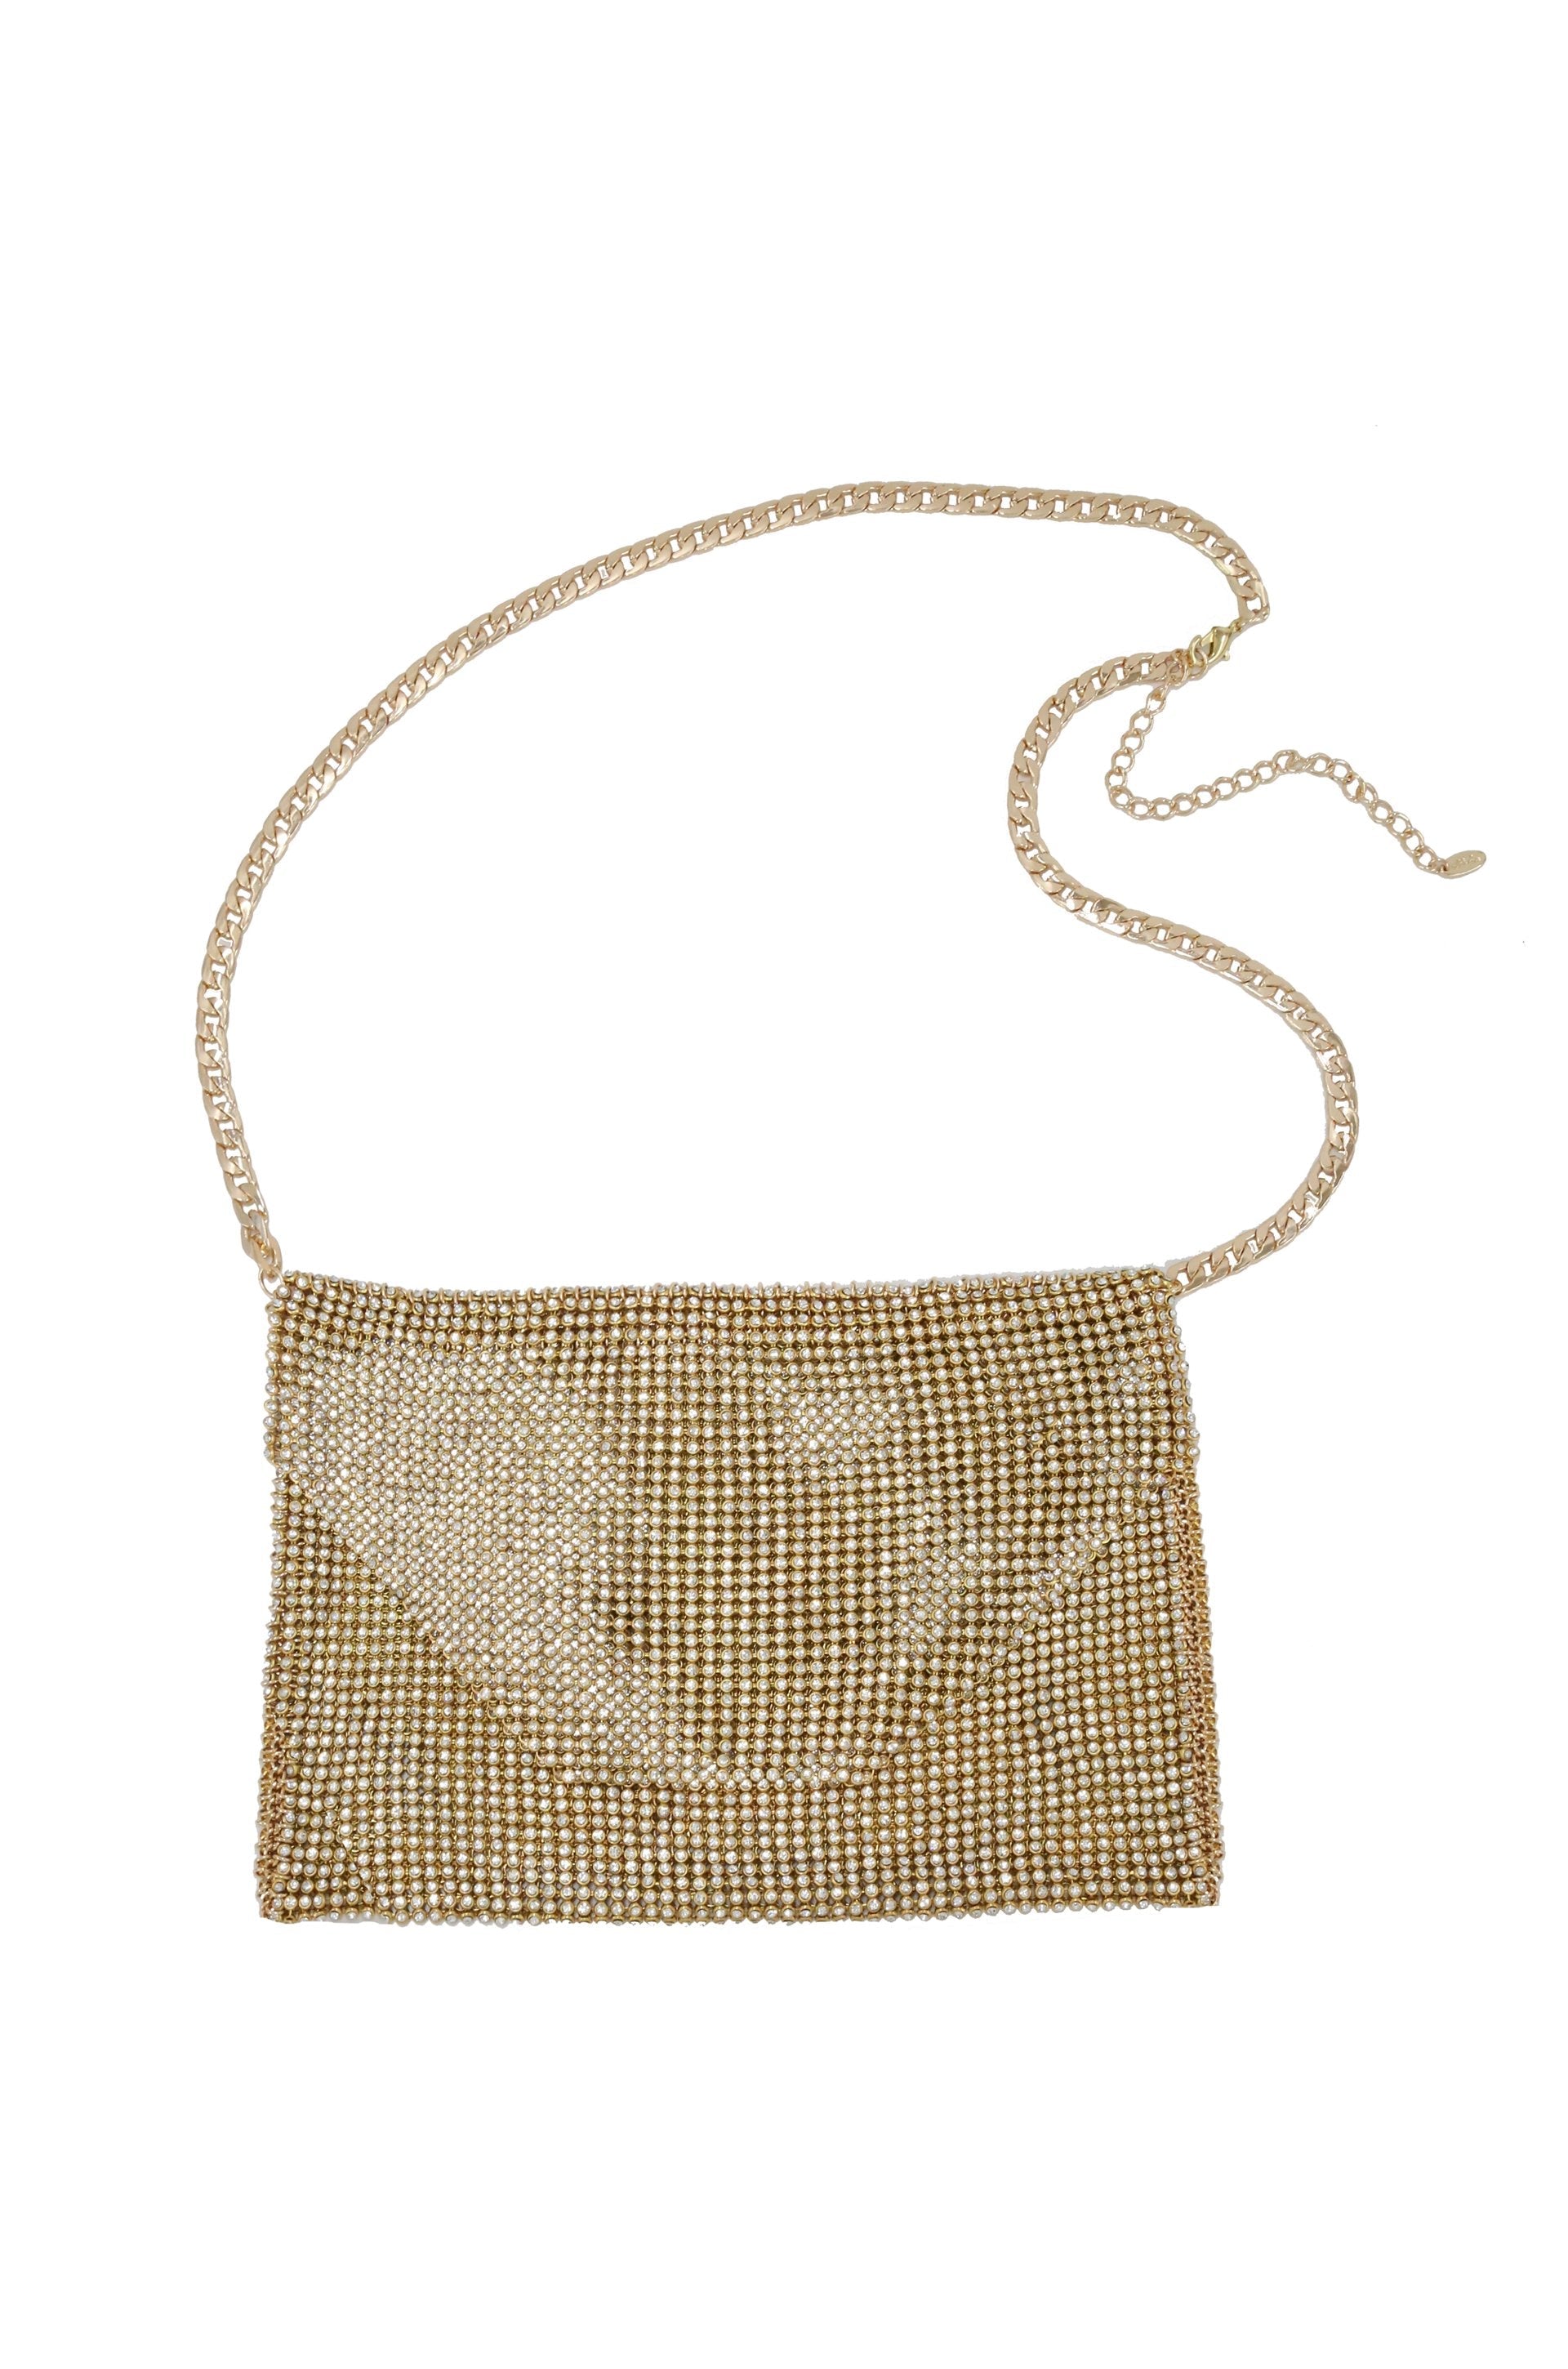 Bag, Gold tone, Gold-tone plated